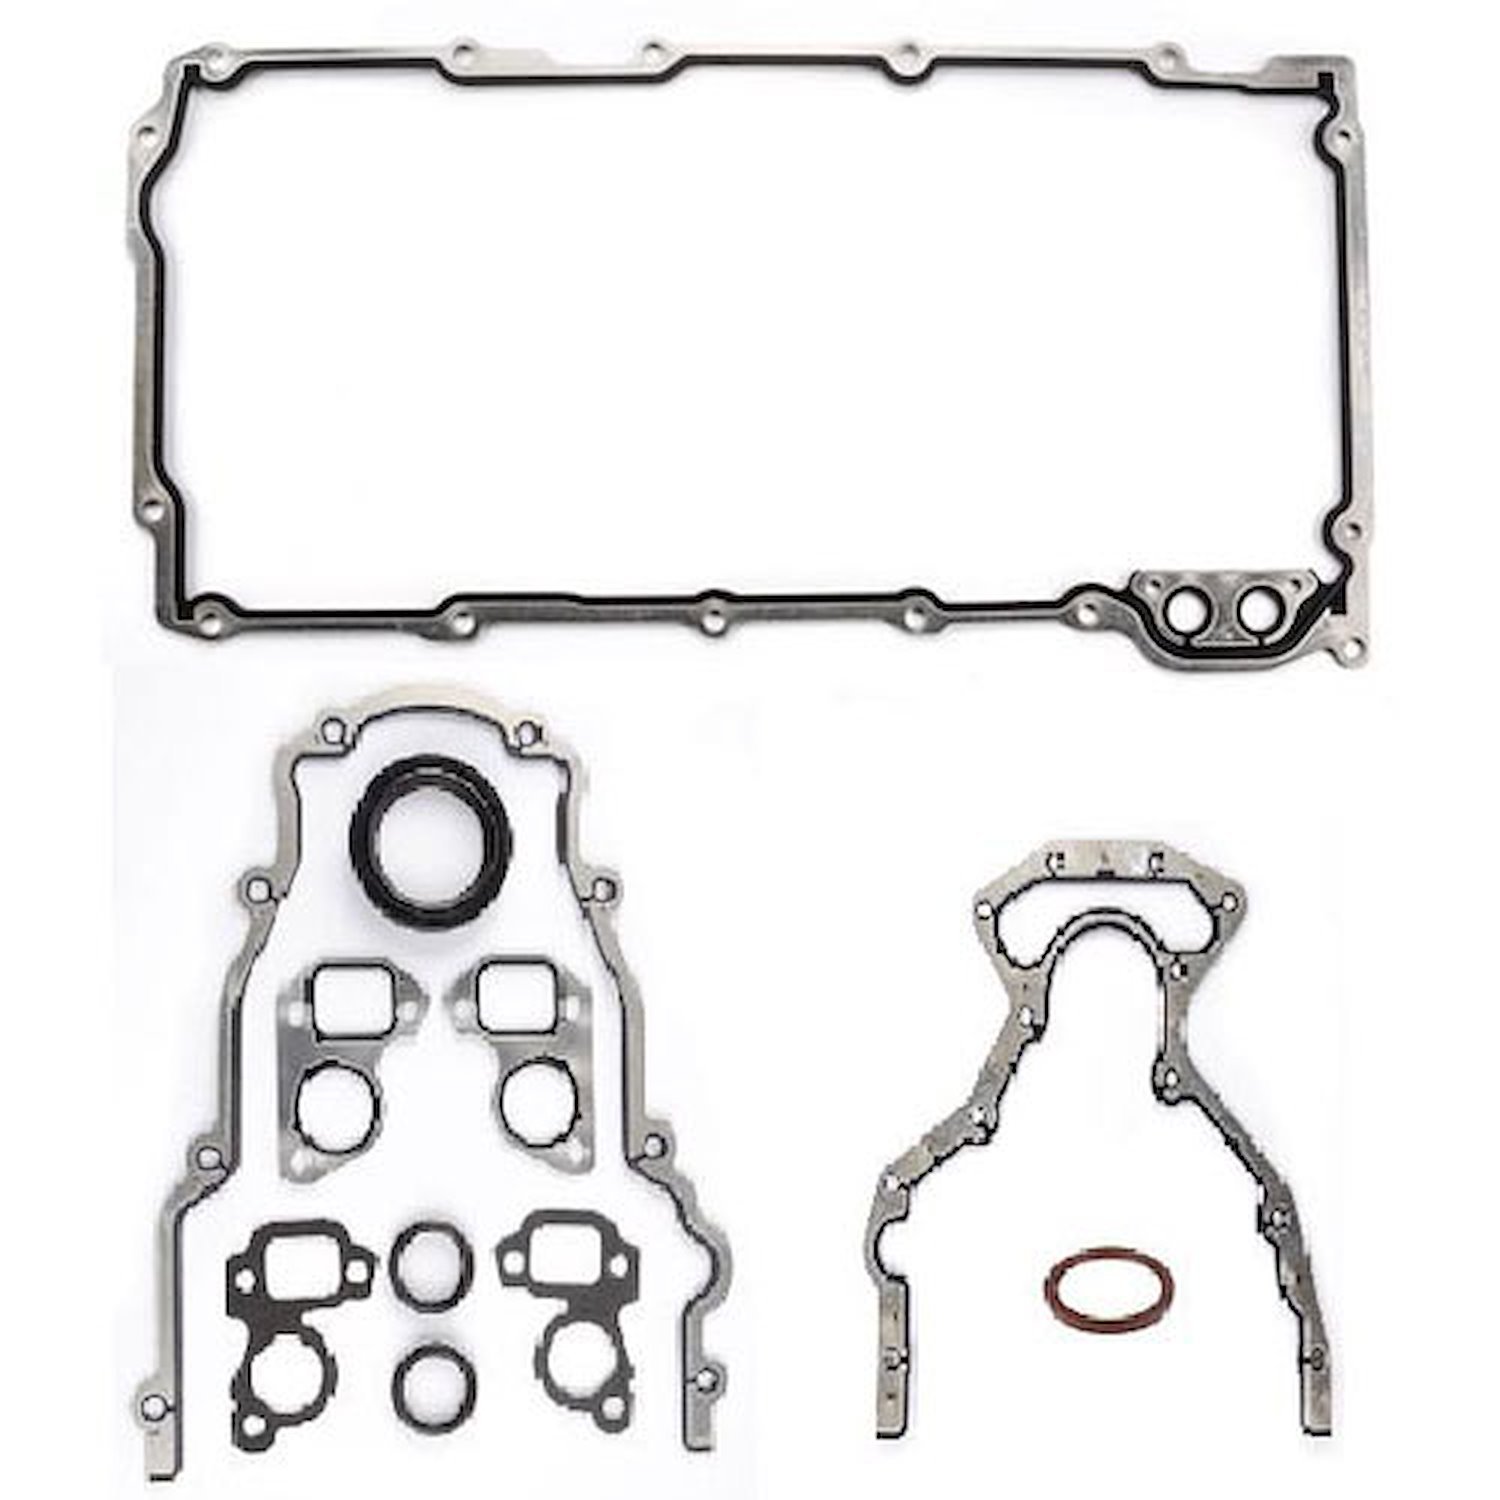 Gasket Kit Lower for GM LS1, LS2, and LS6 Engines